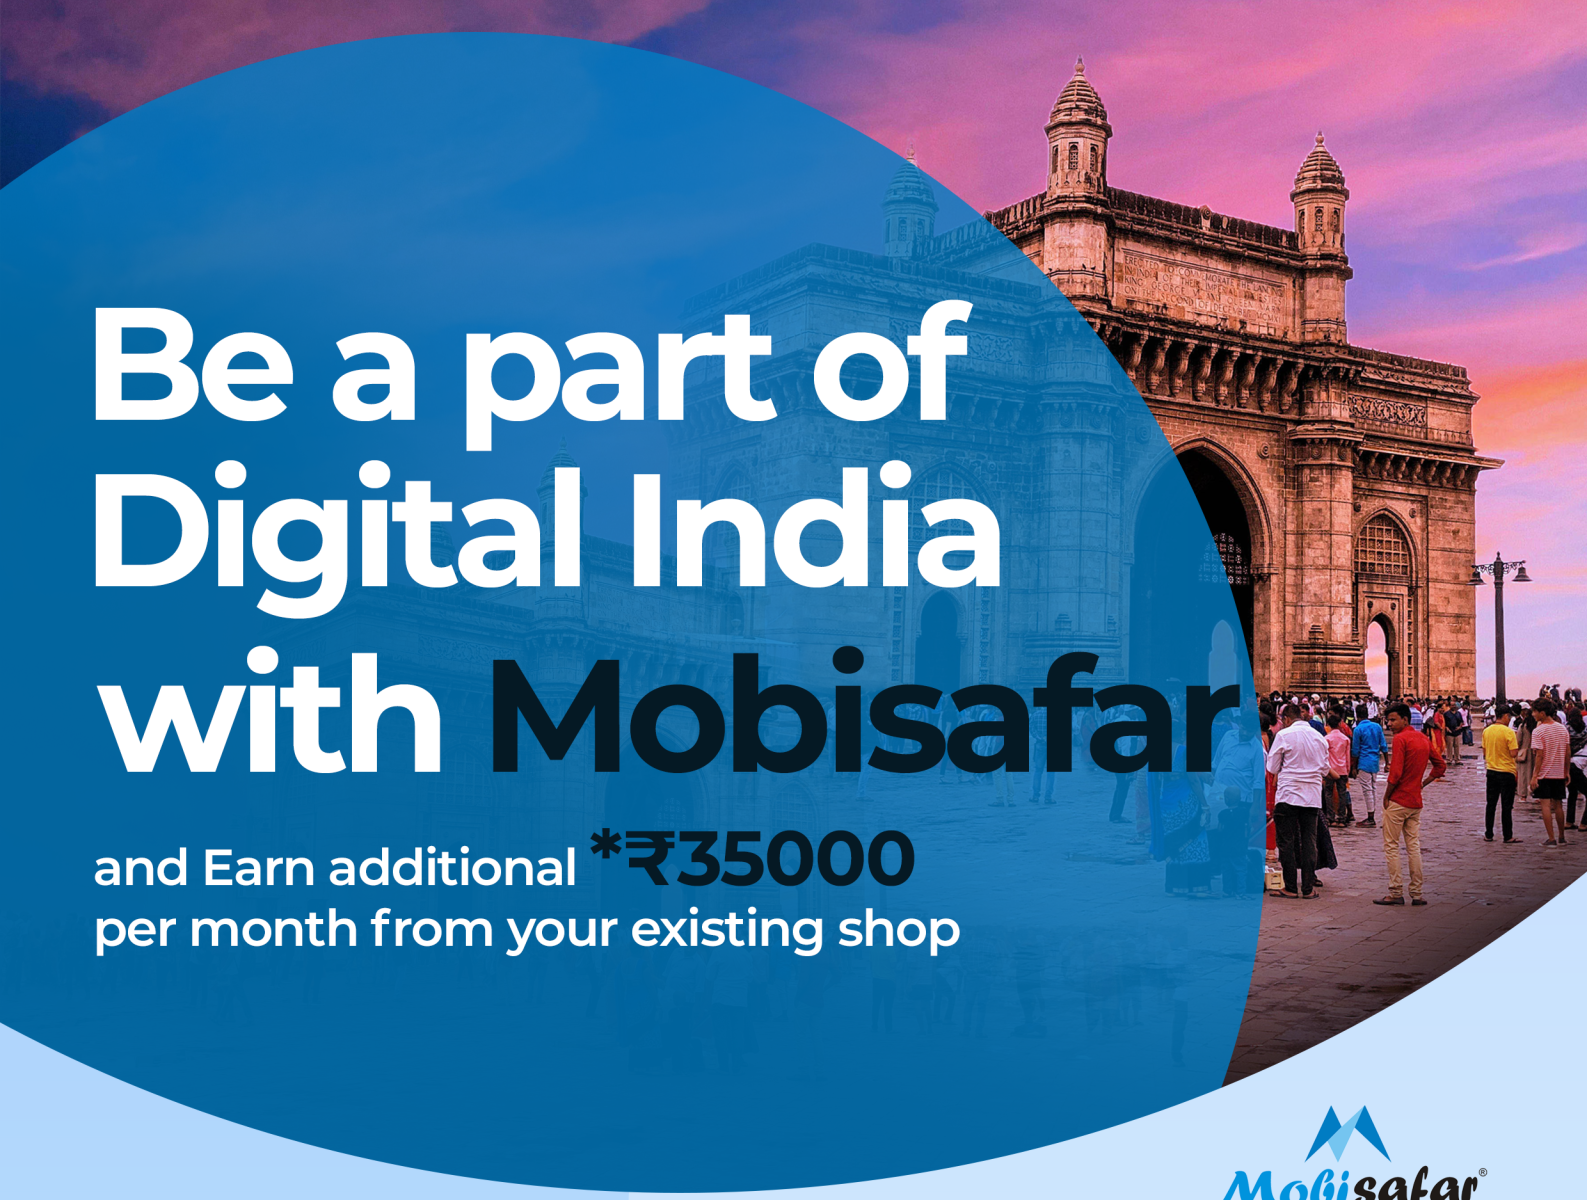 Mobisafar.com - Join Us Today . Become a Mobisafar agent and provide  digital Services to your customers. For More information contact our  Helpline ( 0161-5015050 ) or visit www.mobisafar.com #NPCI #DigitalIndia  #FinancialInclusion | Facebook